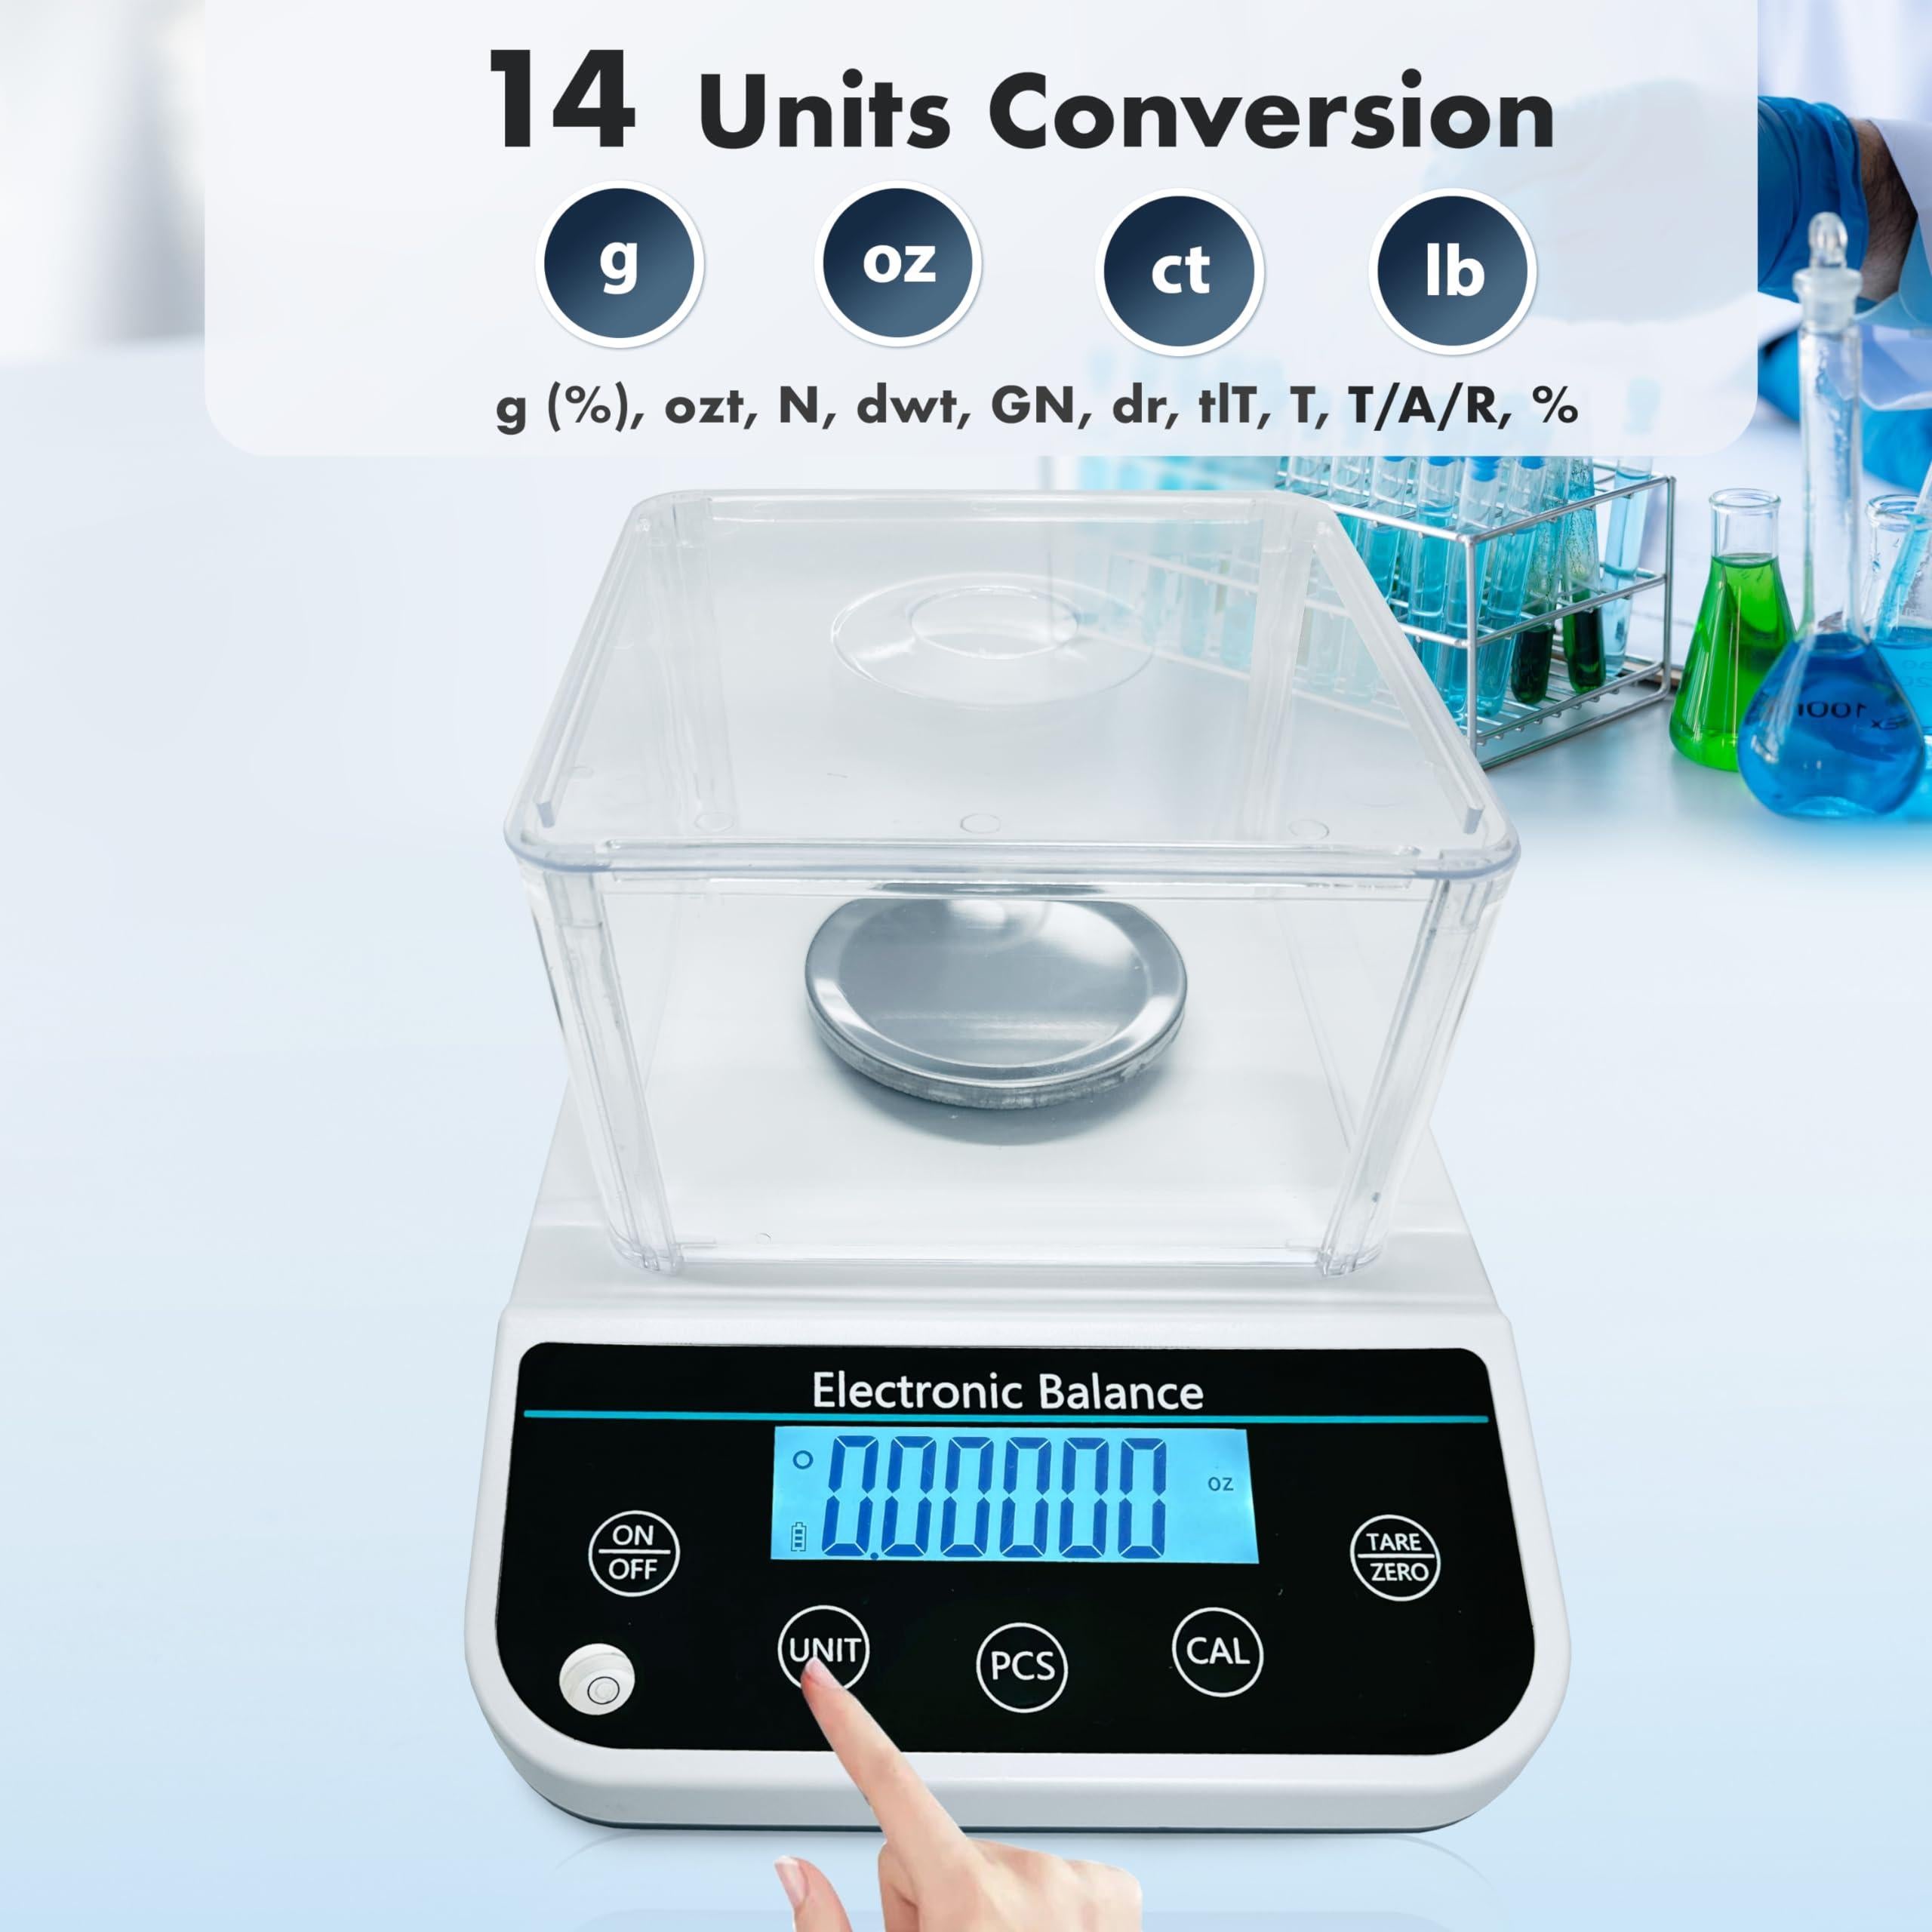 Lab Analytical Balance 600g x 0.001g High Precision Digital Scale .001 Gram Accuracy Scientific Laboratory Milligram Scale with Adapter and 500g Calibration Weight